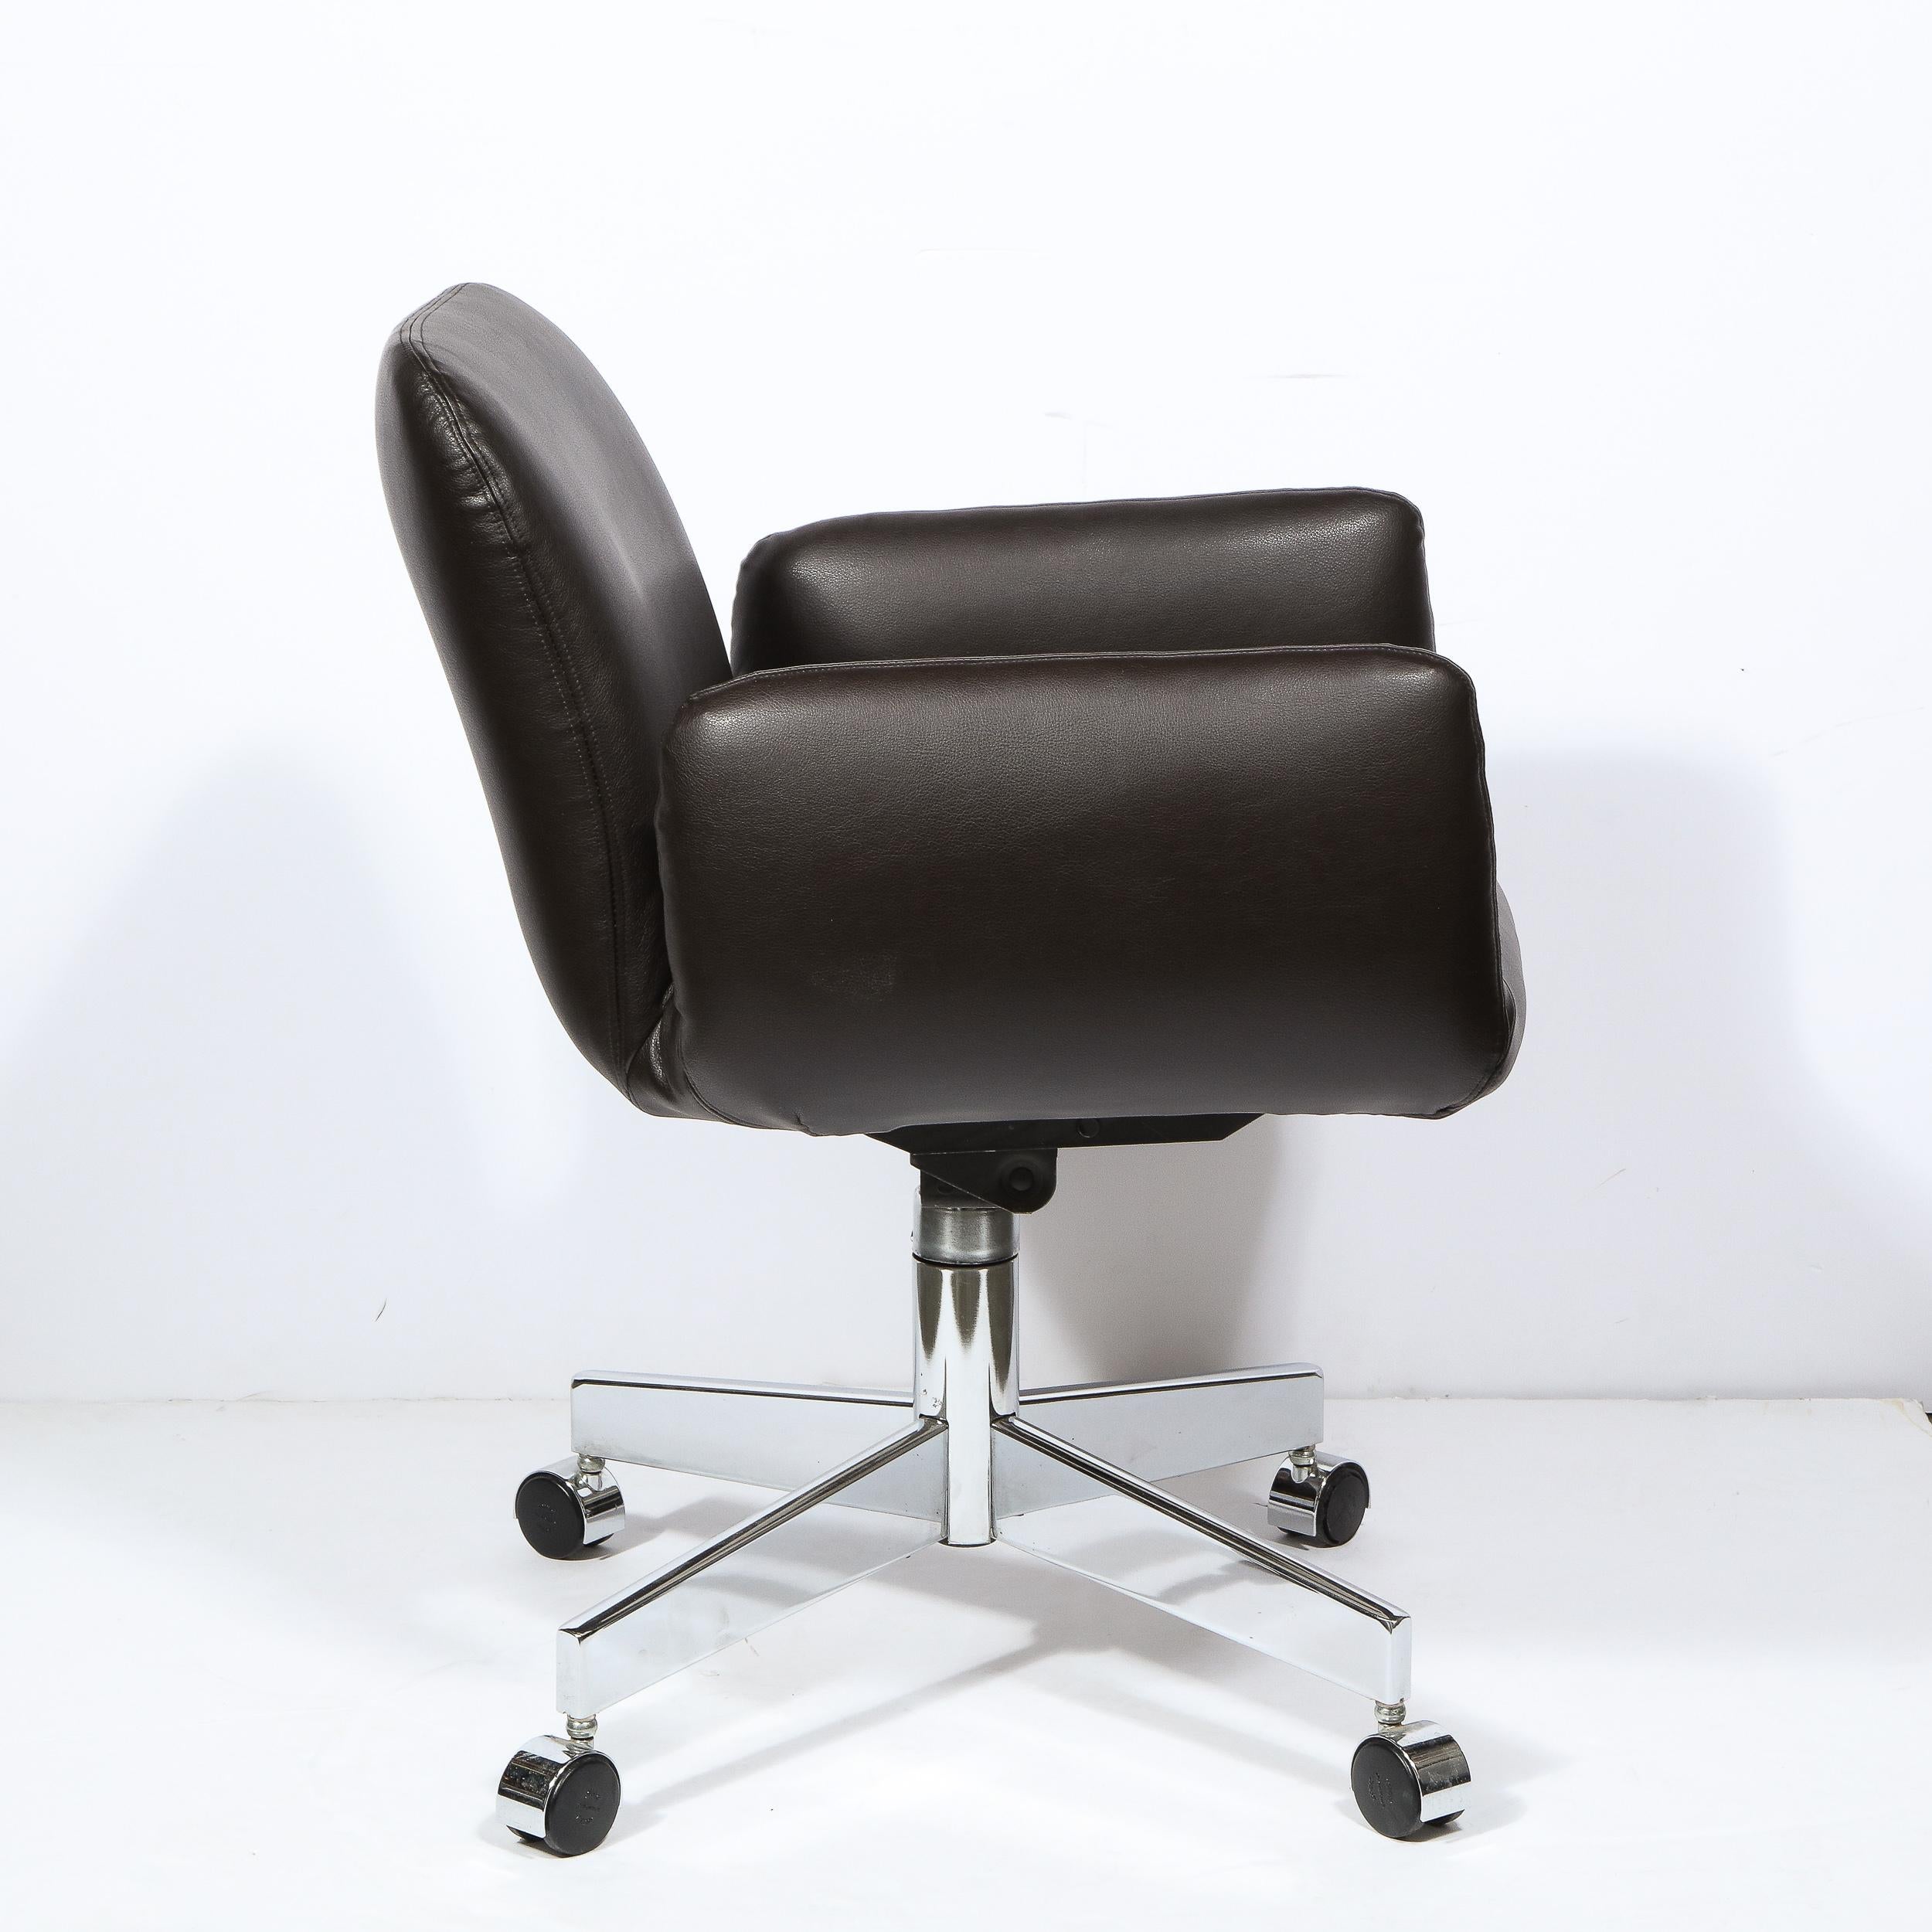 Late 20th Century Mid Century Modern Polished Chrome & Chocolate Leather Swivel Chair on Castors